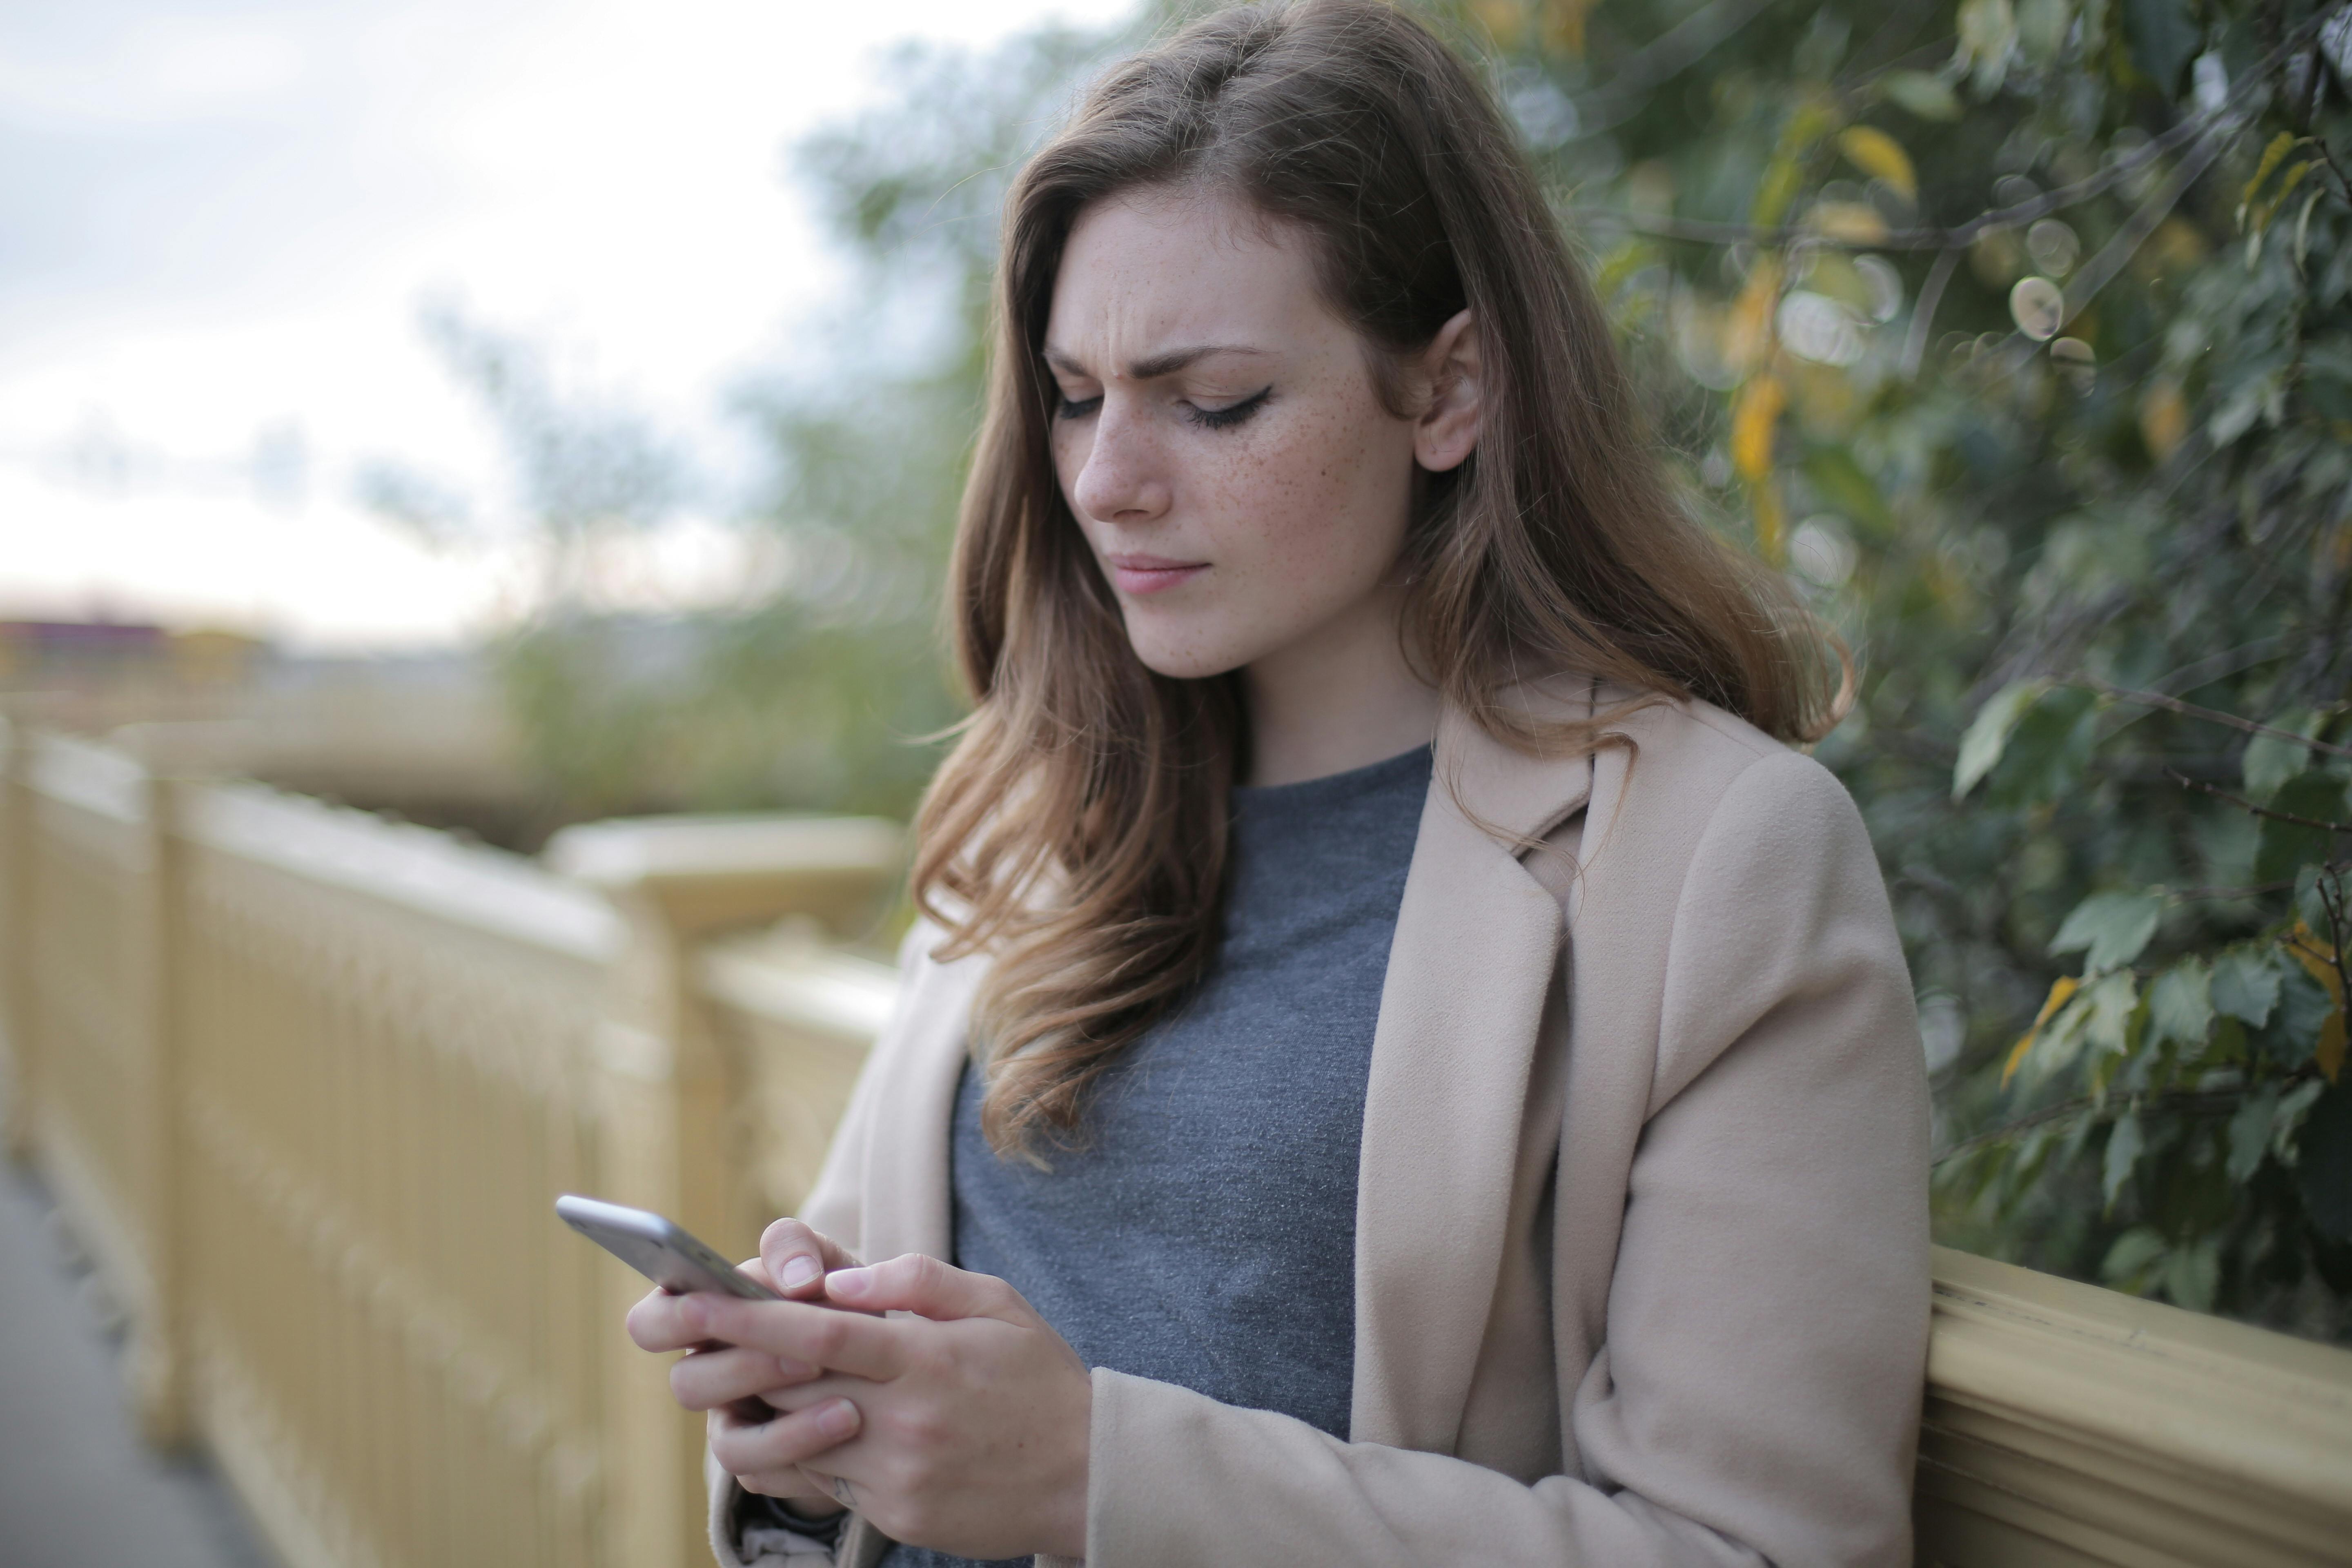 A confused-looking woman looking at her phone | Source: Pexels